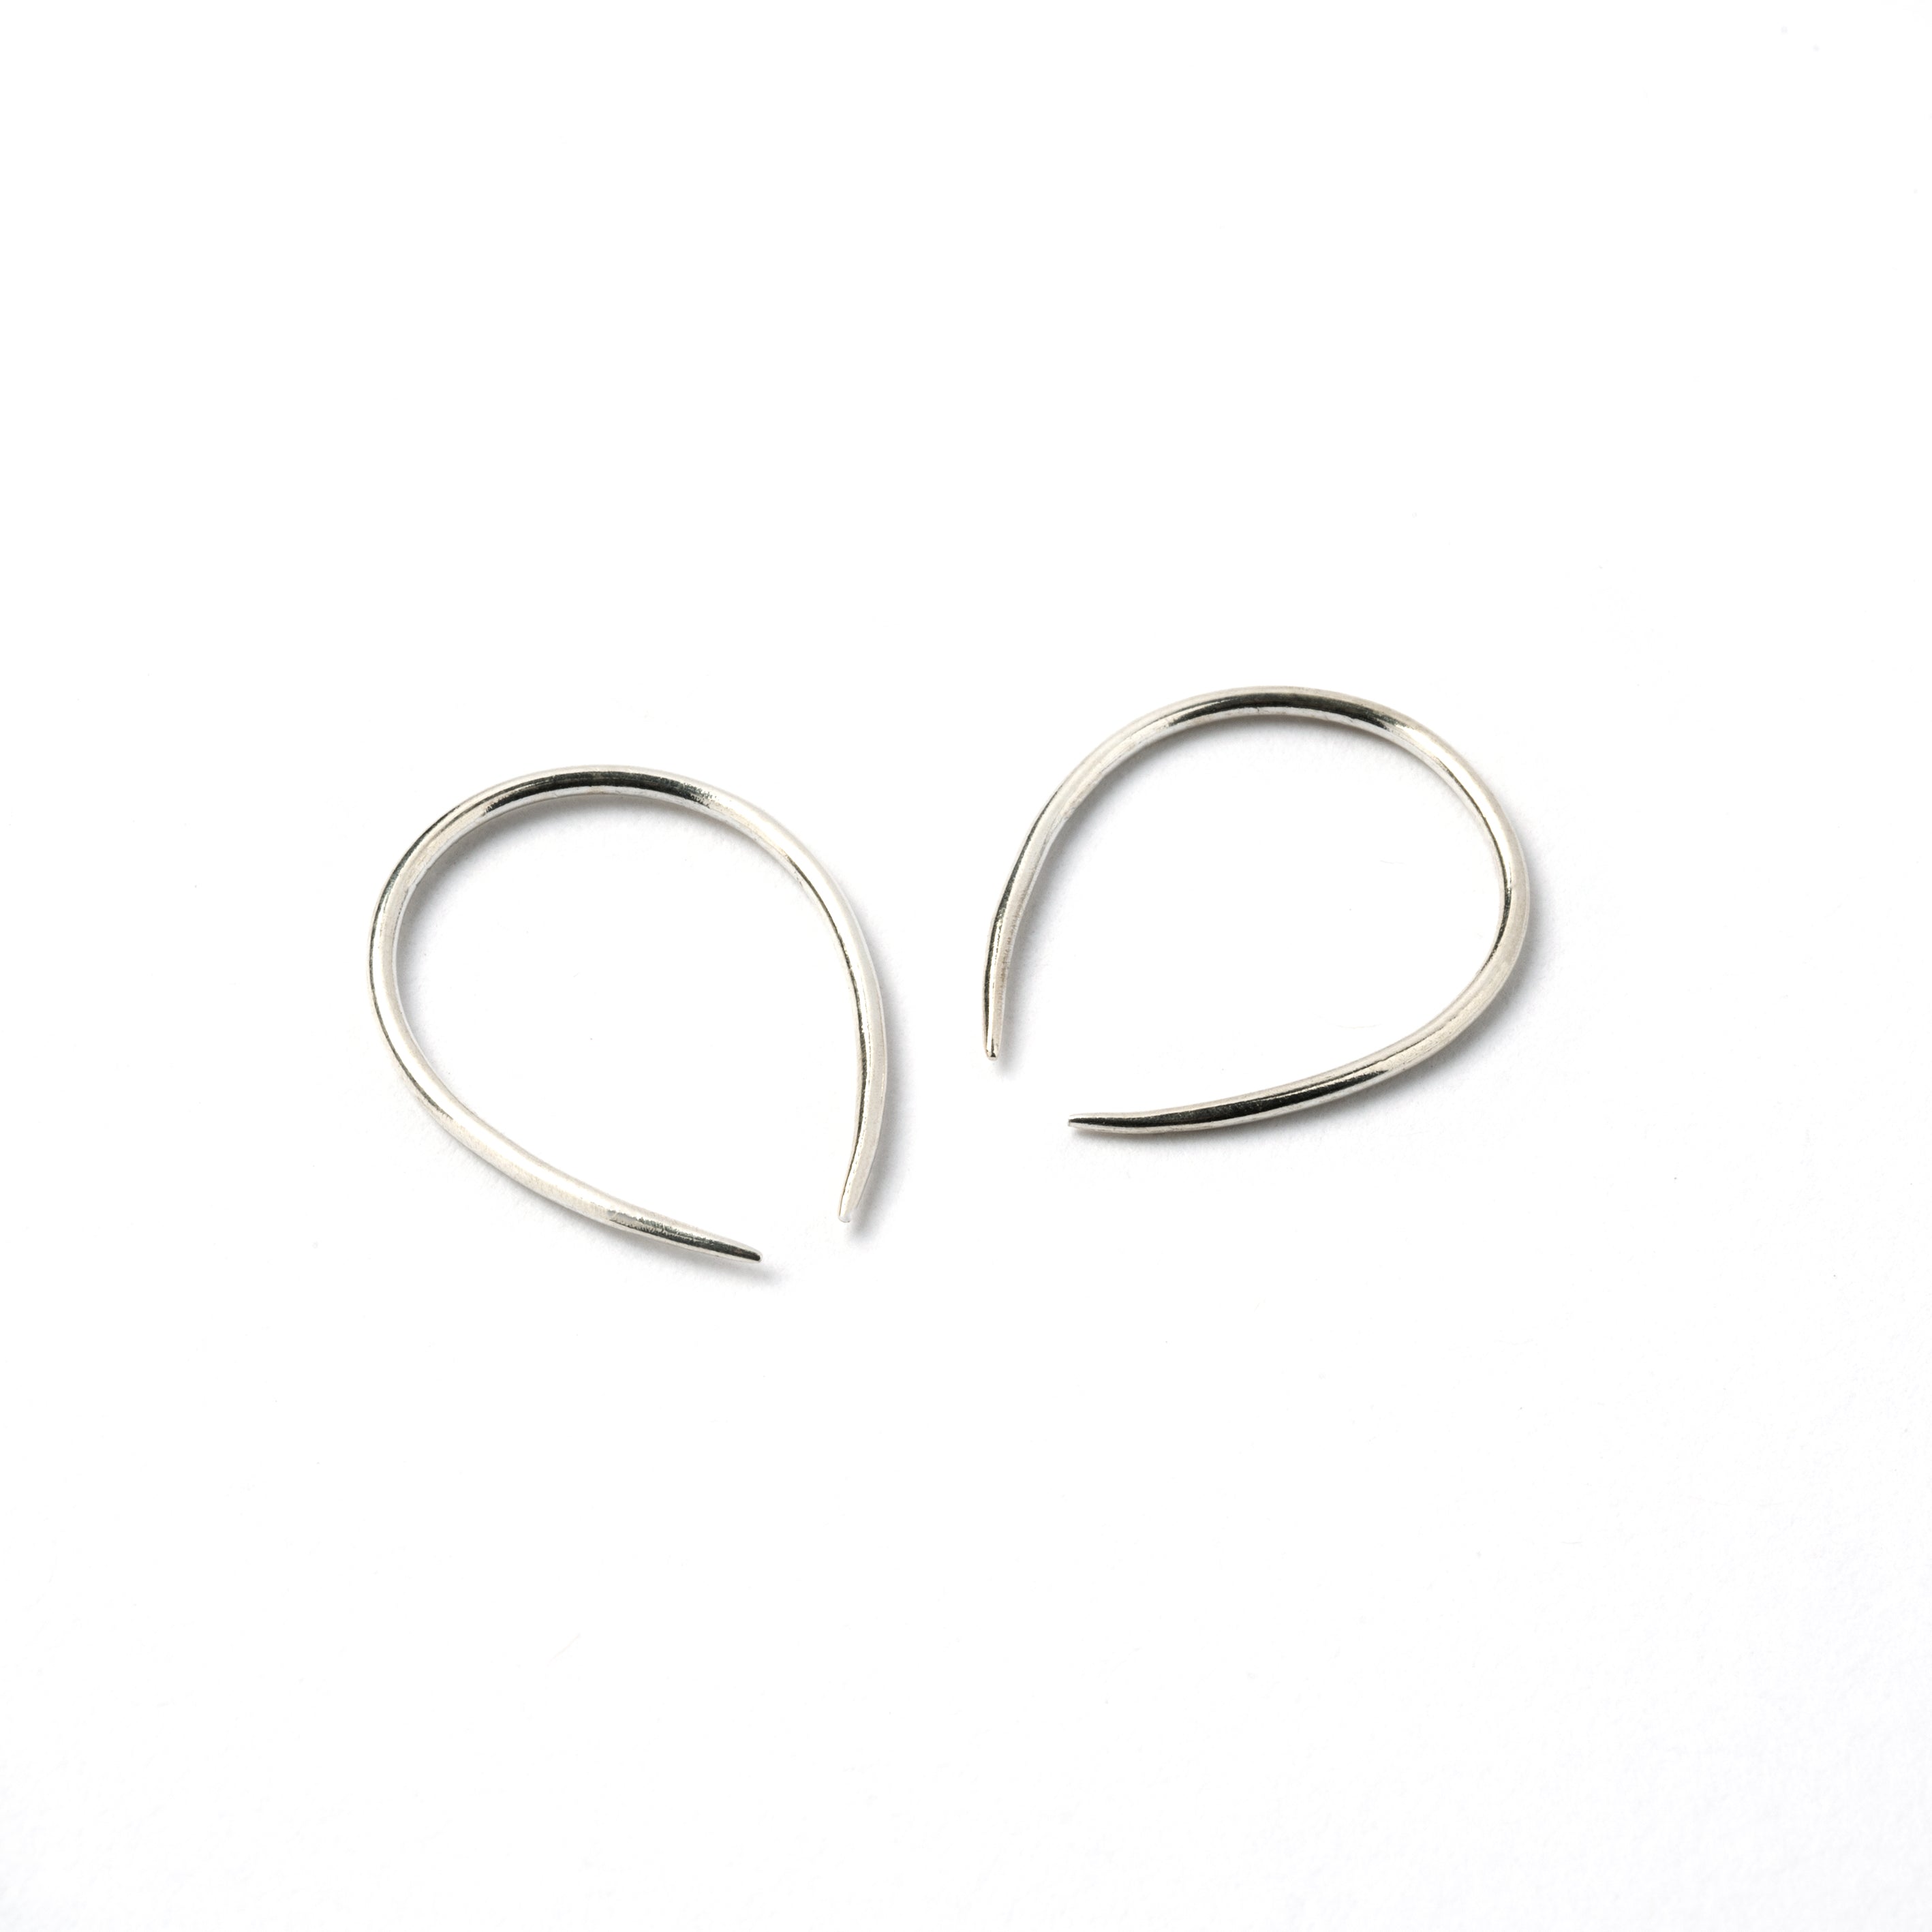 pair of 1mm silver wire horseshoe earrings side view